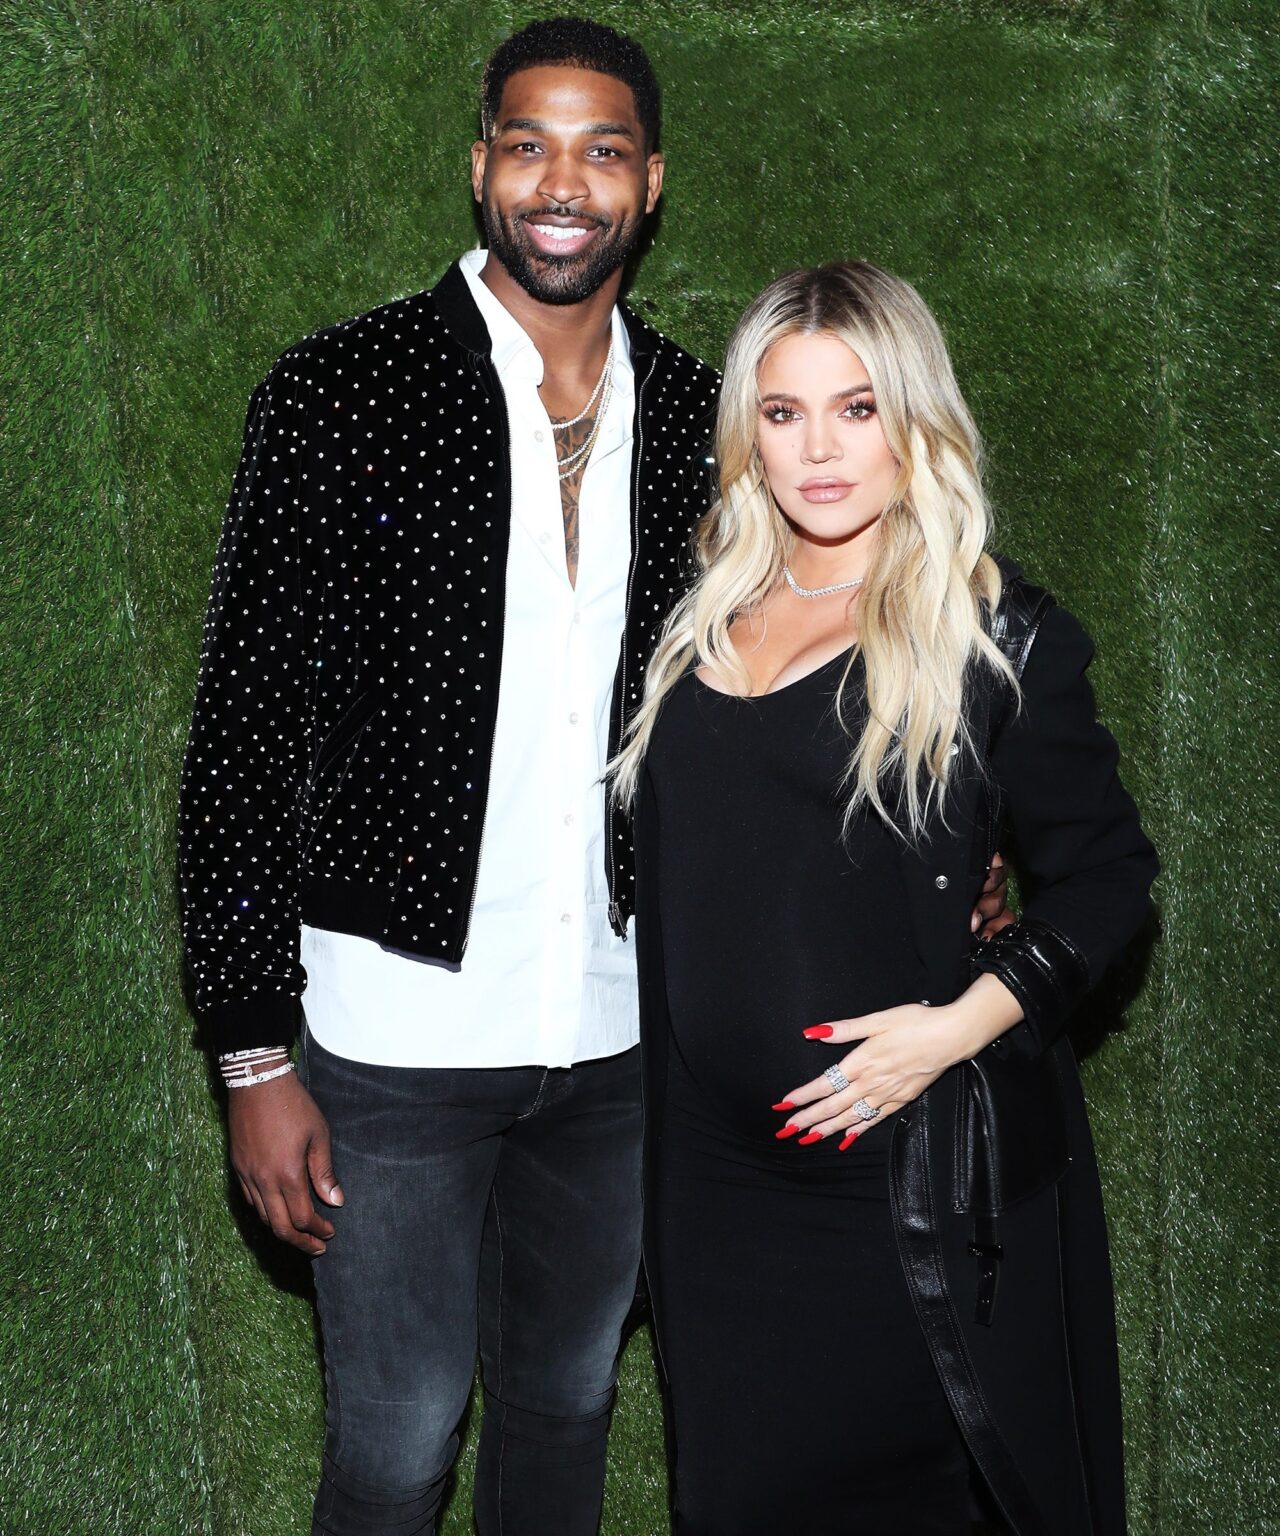 Is Tristan Thompson still cheating on Khloé Kardashian or has he just proposed? These leaked videos could be make or break. Here's why.